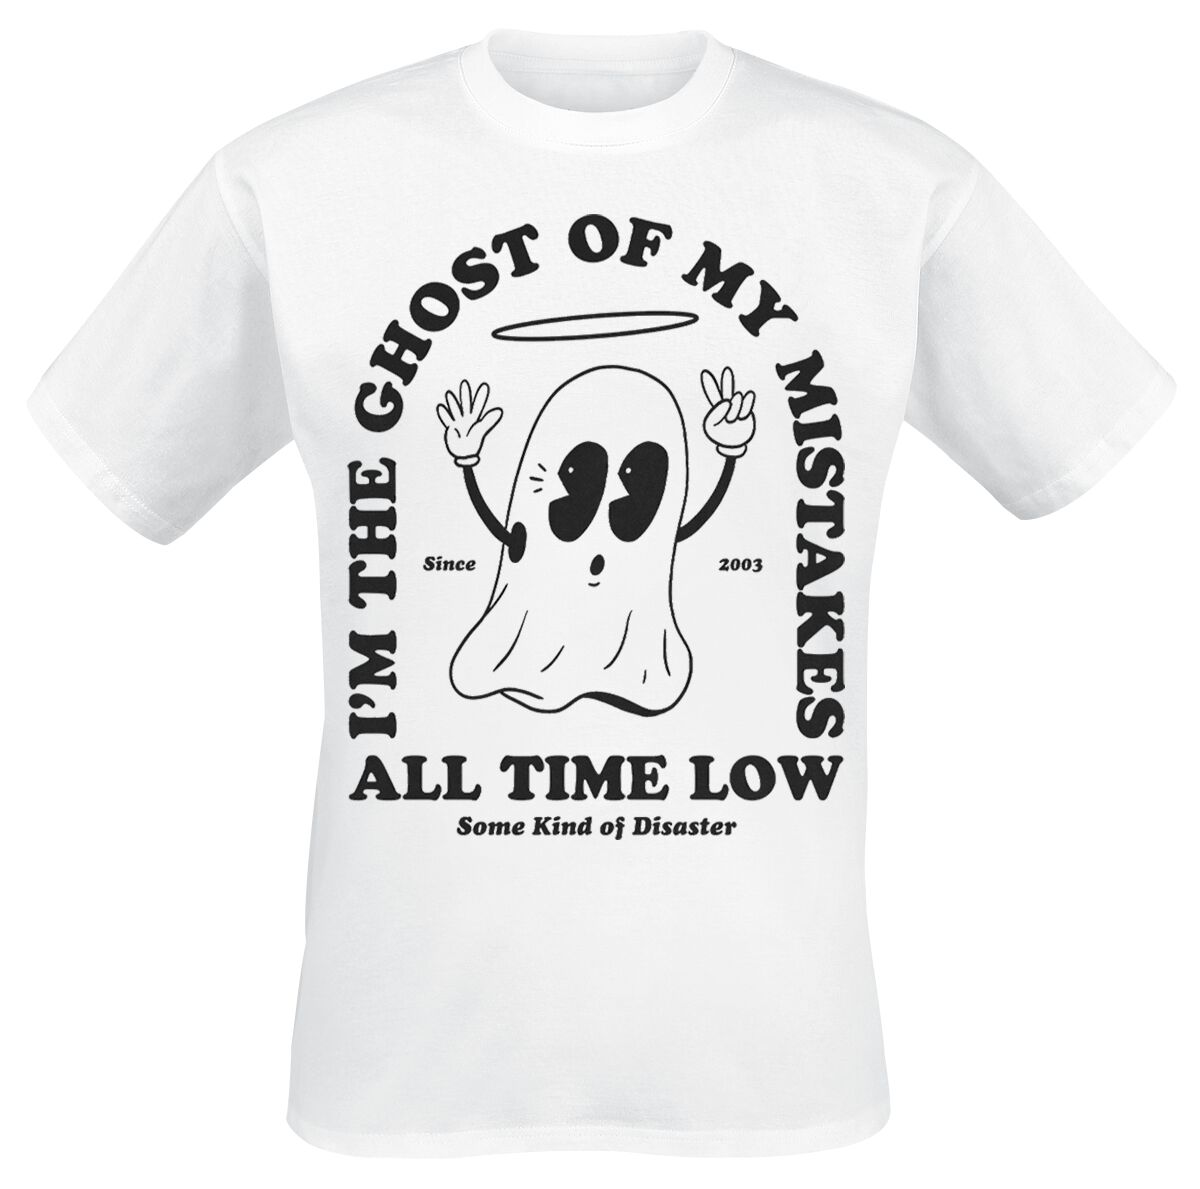 T-Shirt Manches courtes de All Time Low - Ghost Of My Mistakes - S à XXL - pour Homme - blanc